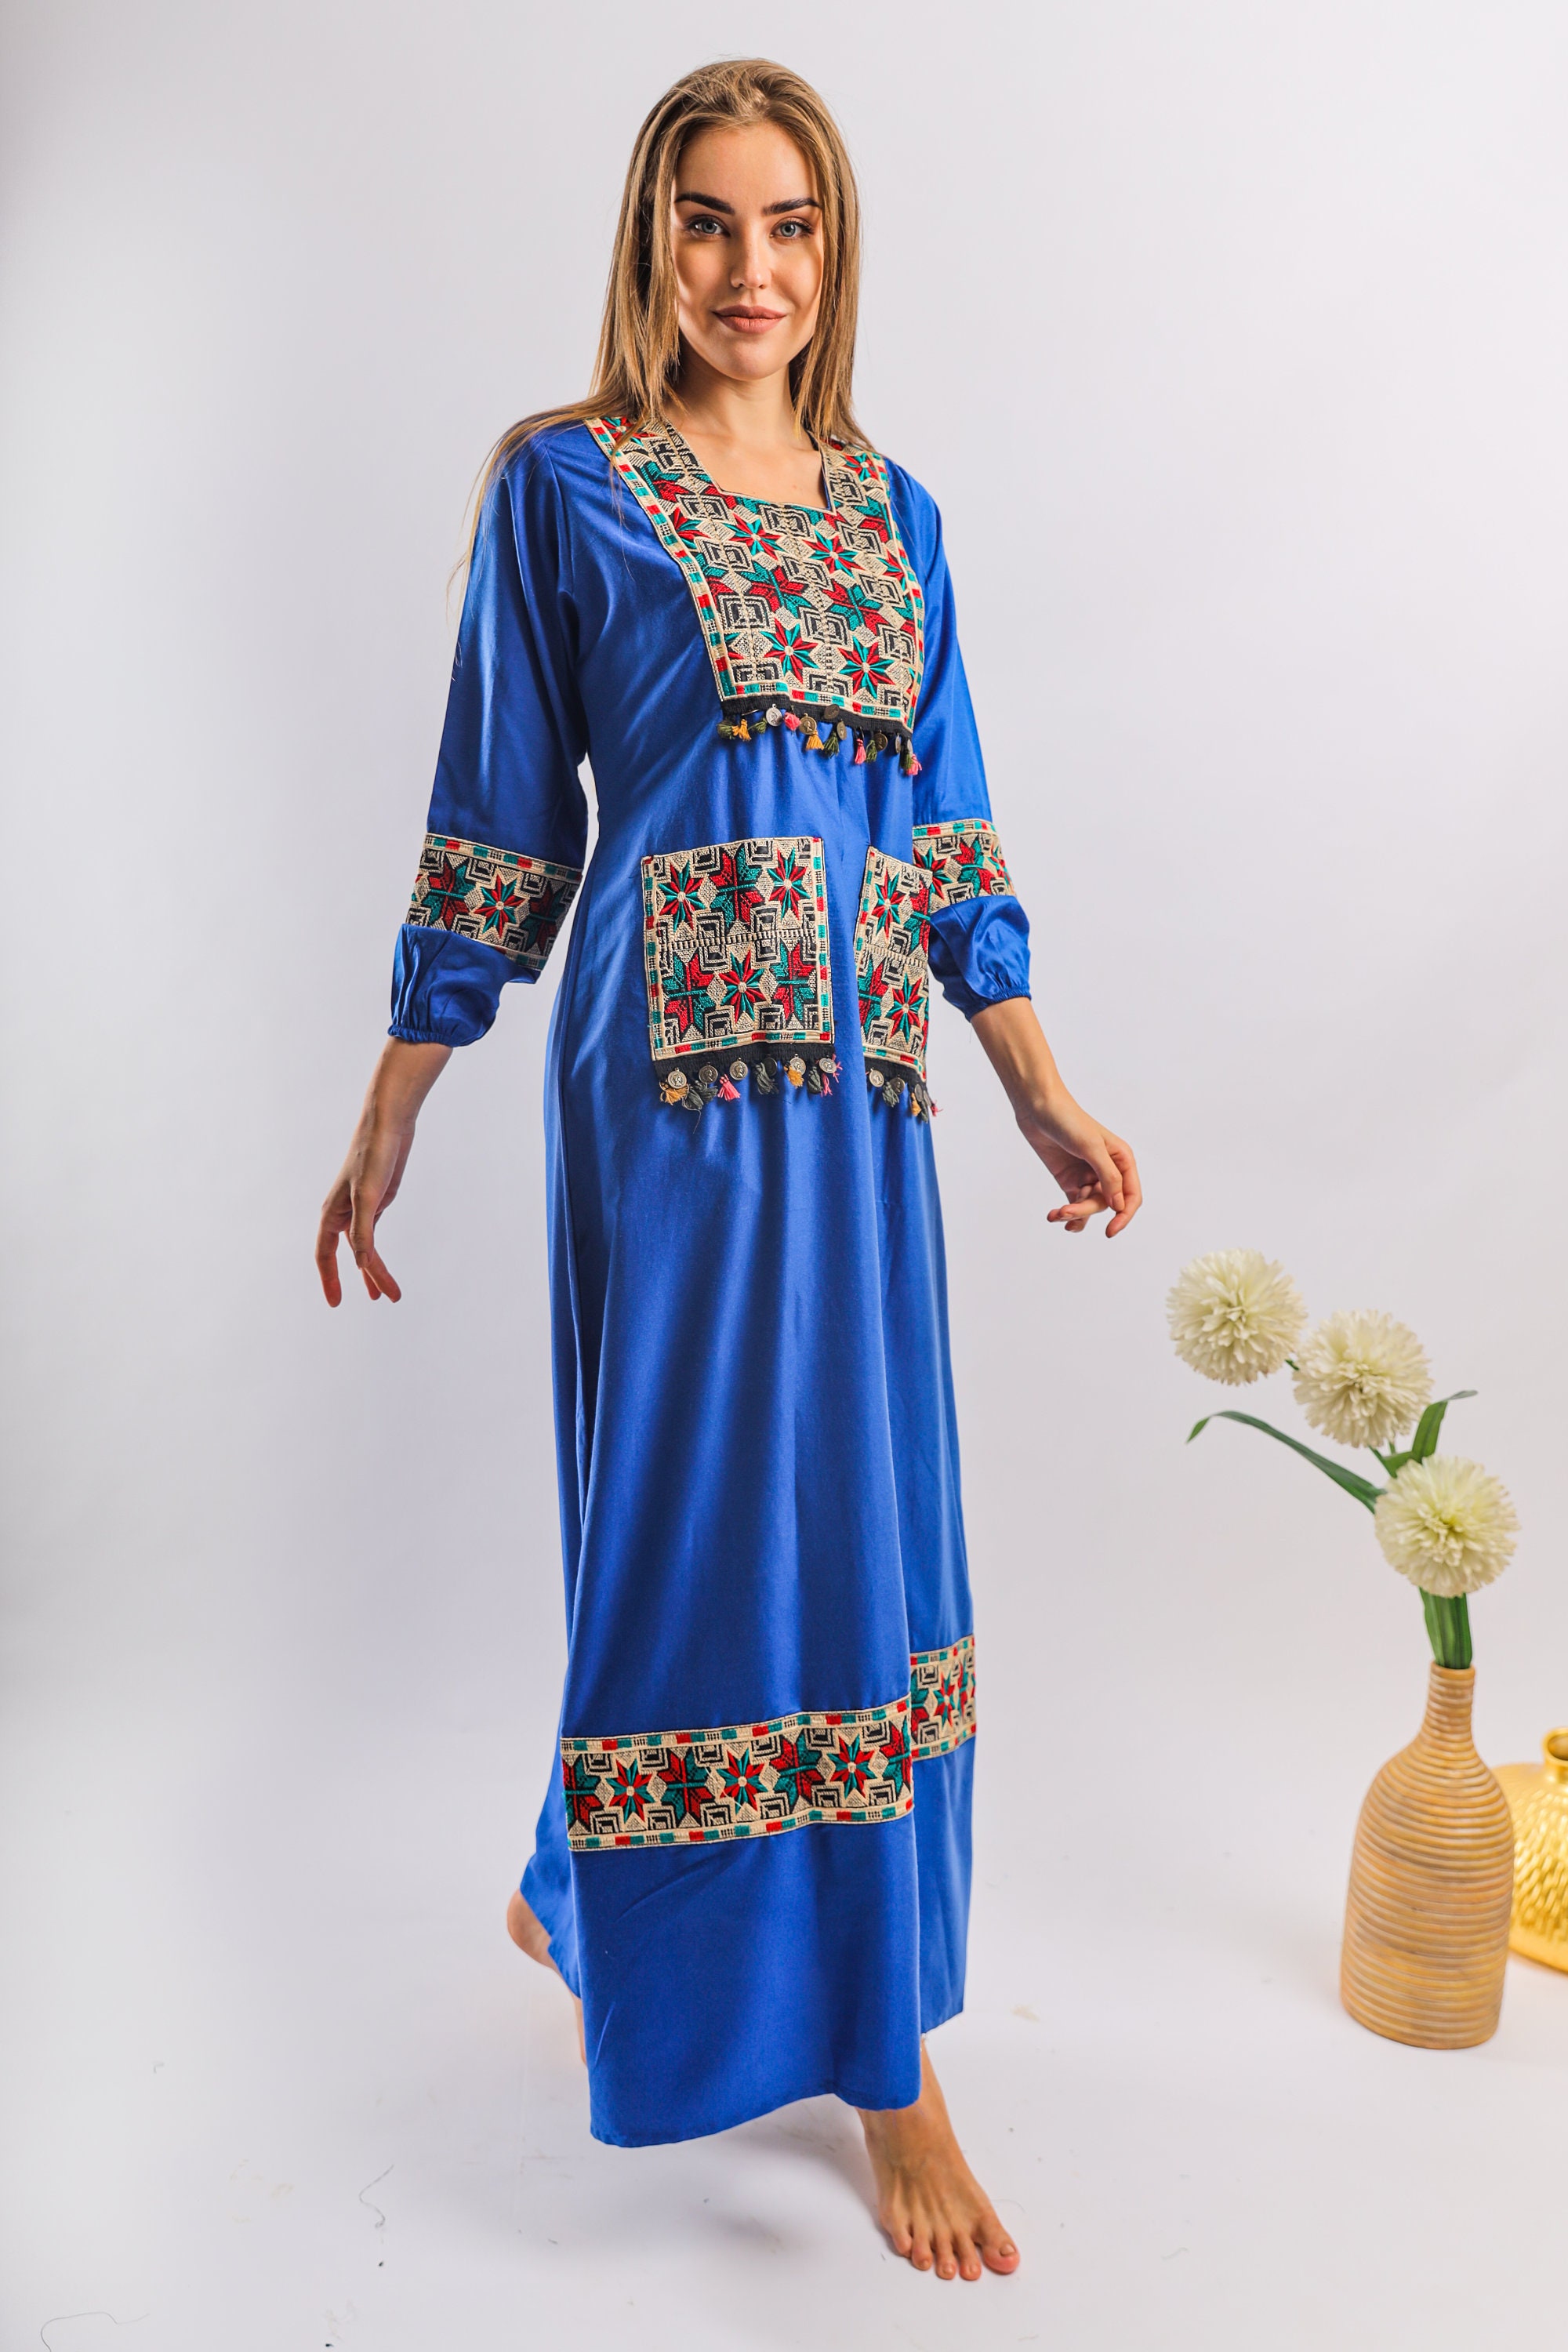 Blue Gypsy embroidered Caftan with pockets caftans for women | Etsy